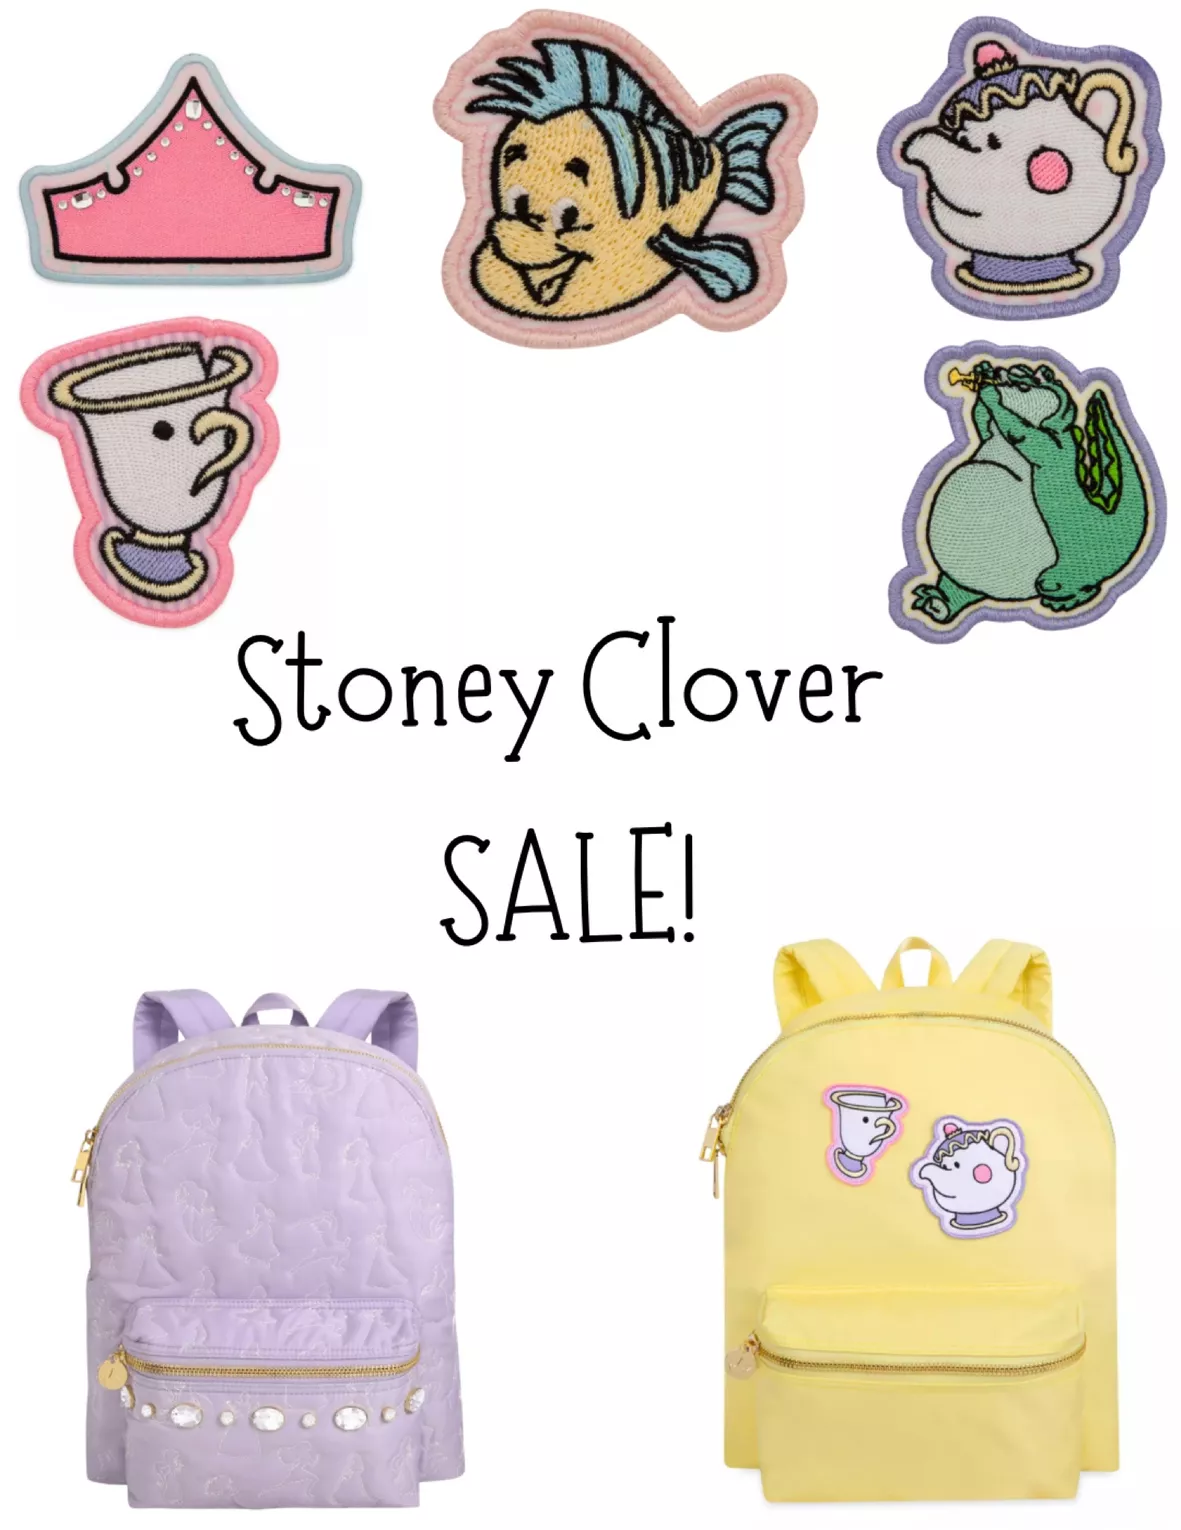 Disney Princess by Stoney Clover Lane Releases Today!